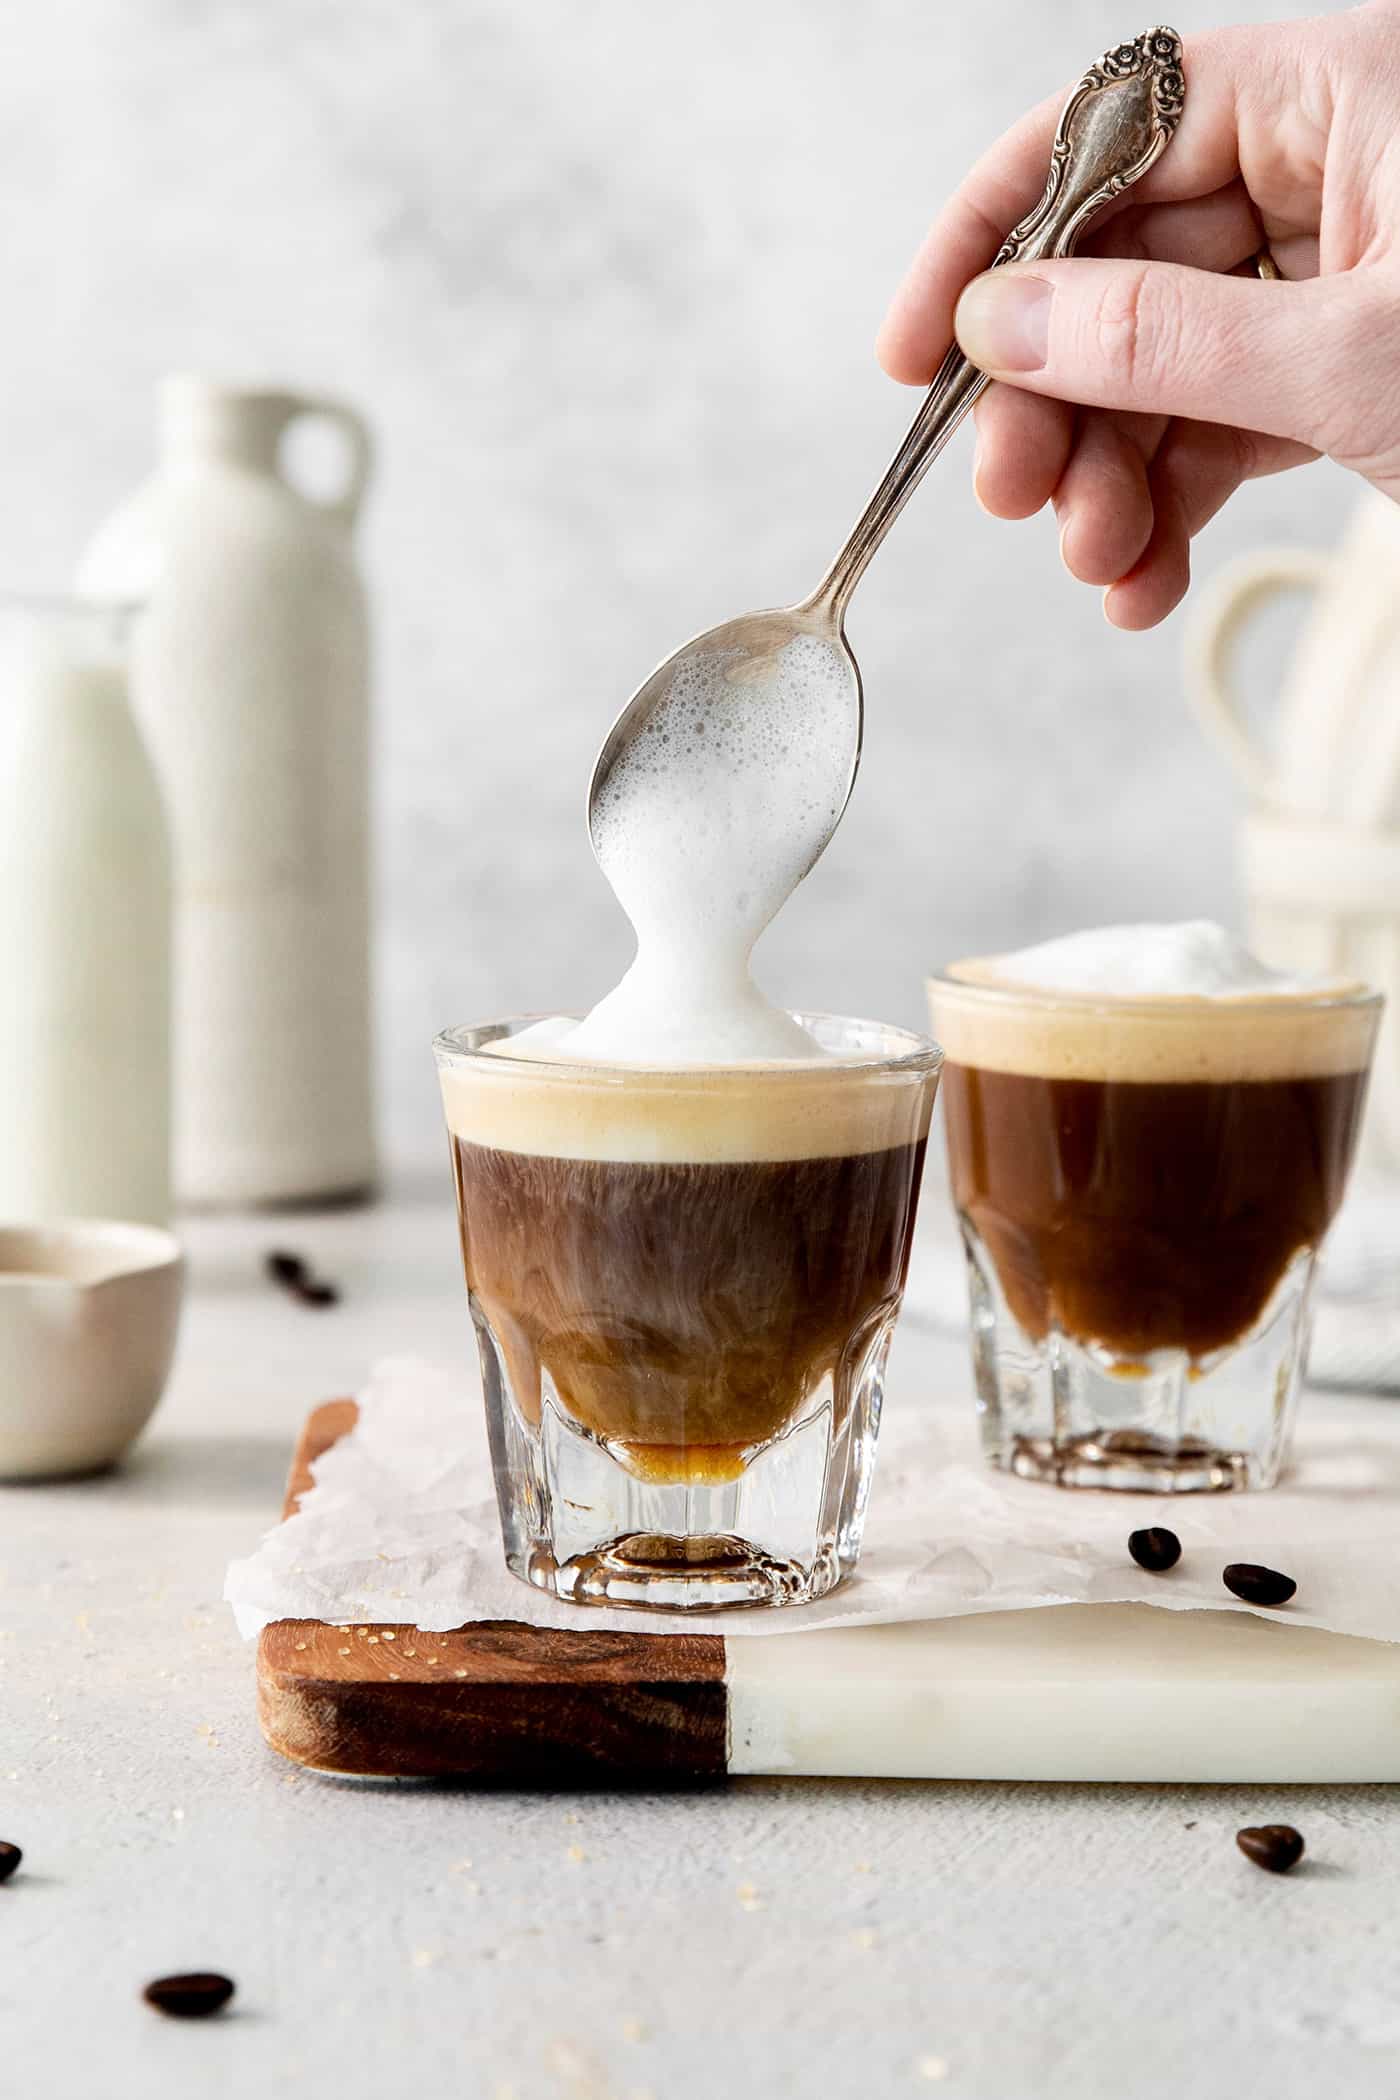 A hand holding a spoon tops cortaditos with frothed milk.